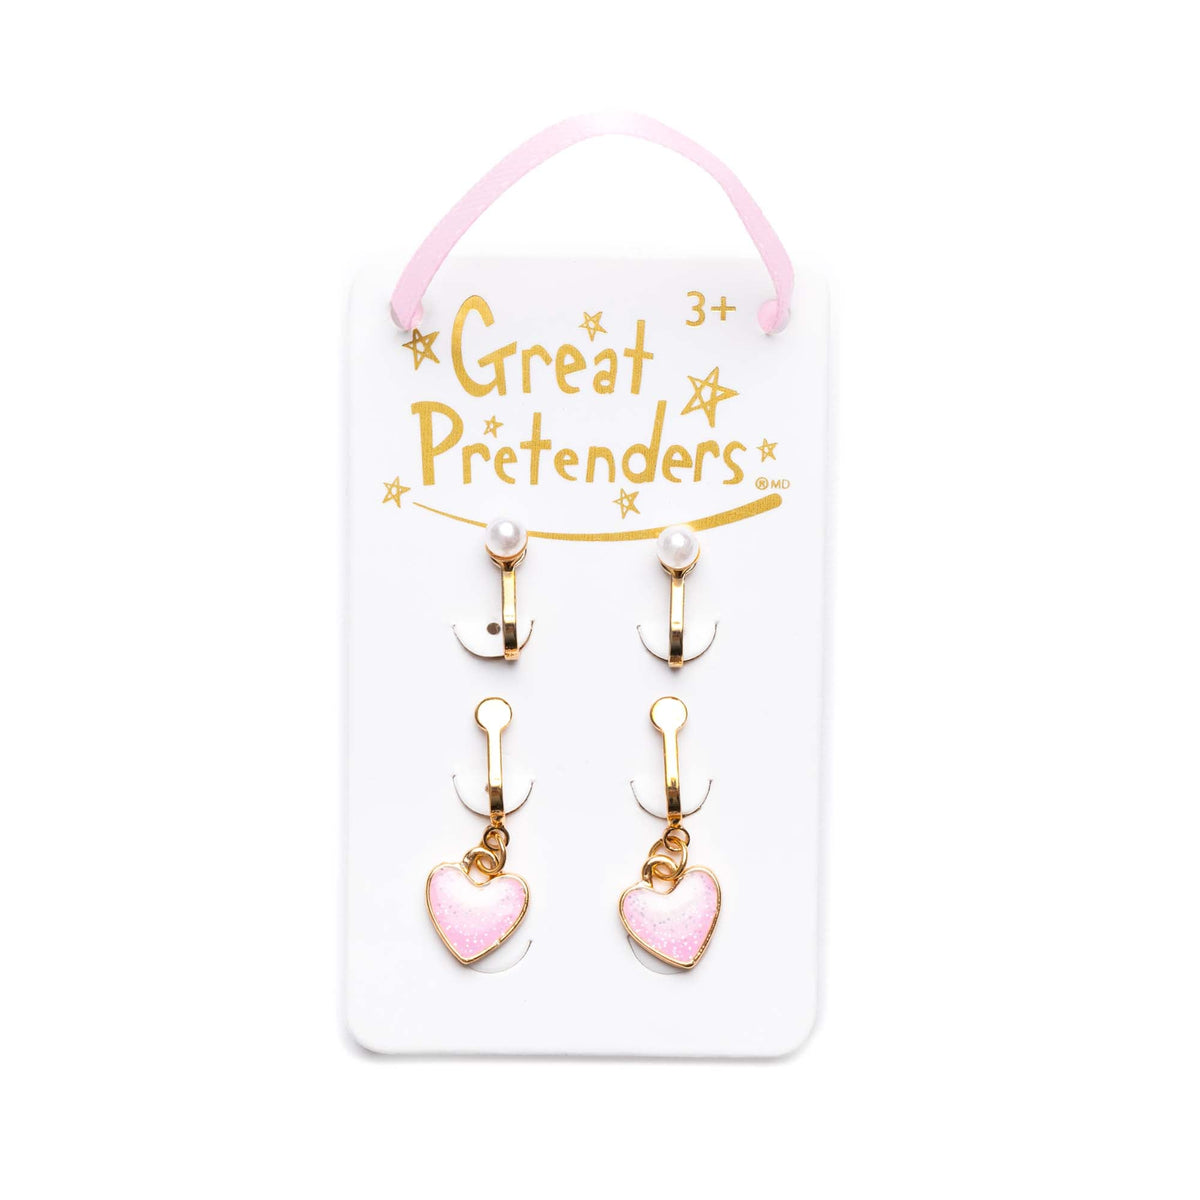 Great Pretenders Impulse Buying Boutique Cute Clip on Earrings , 6 Count